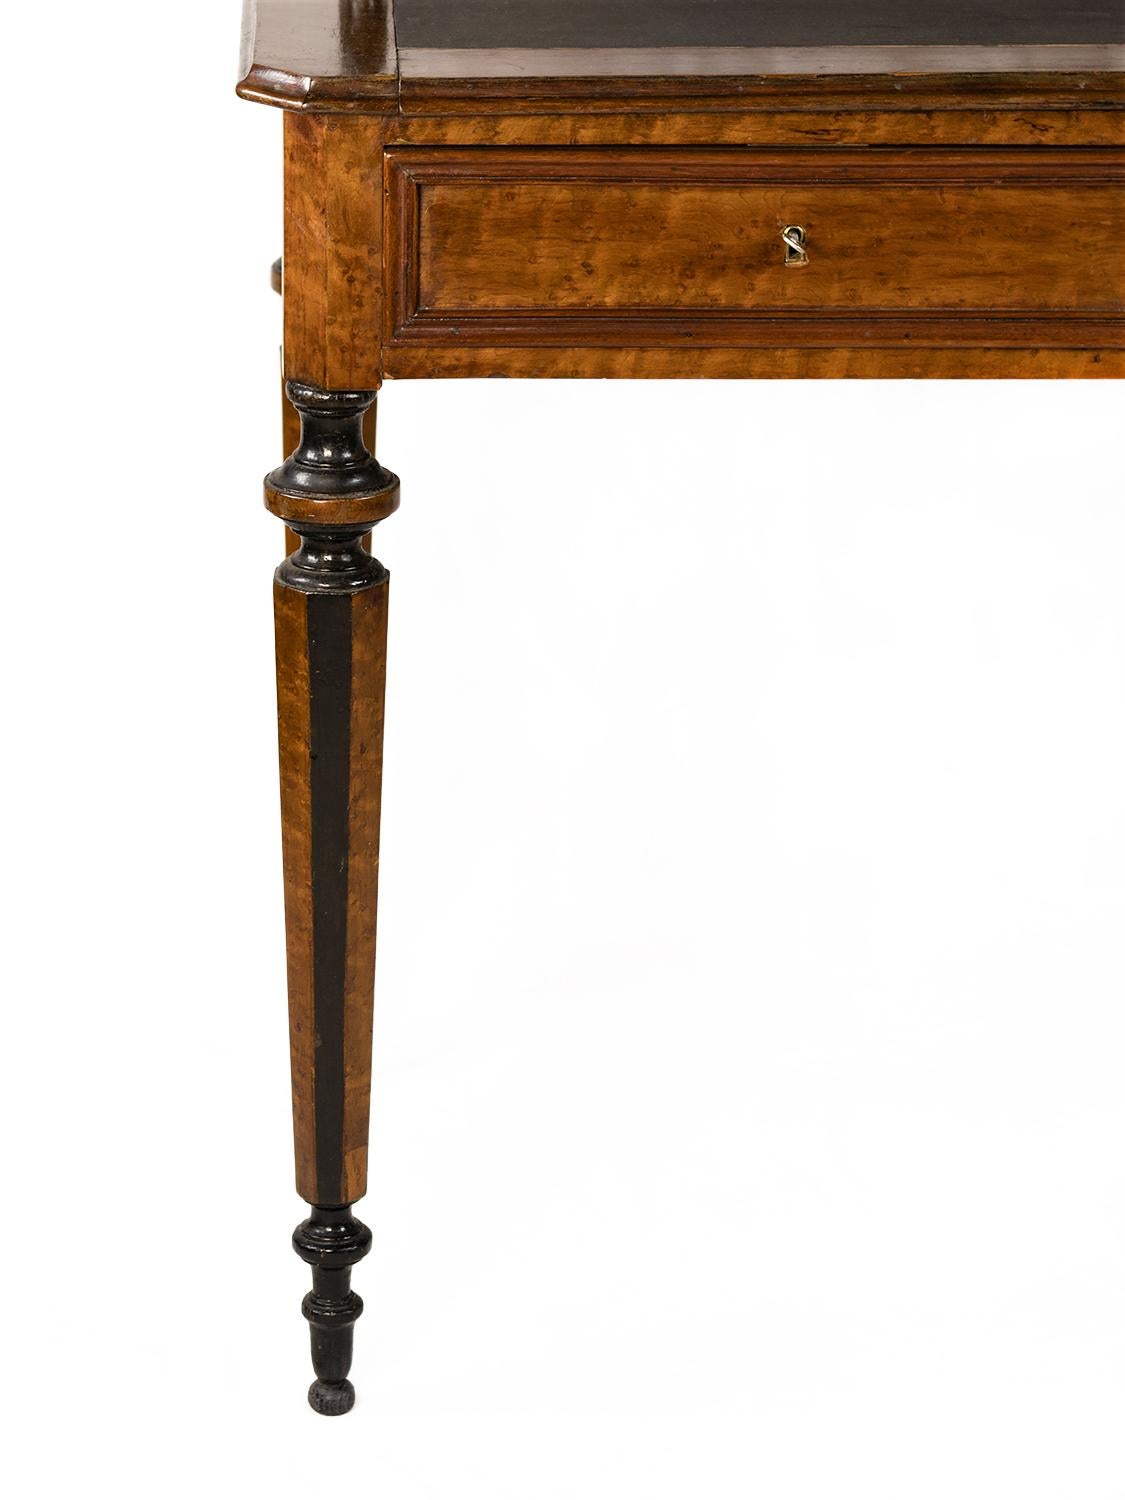 A unique 19th century Napoleon III desk Bonheur Du Jour in walnut and mahogany. 
Upper part showcase with three shelves and lower part with a couple of drawers and extendable top and legs with black lacquered doucine finish.